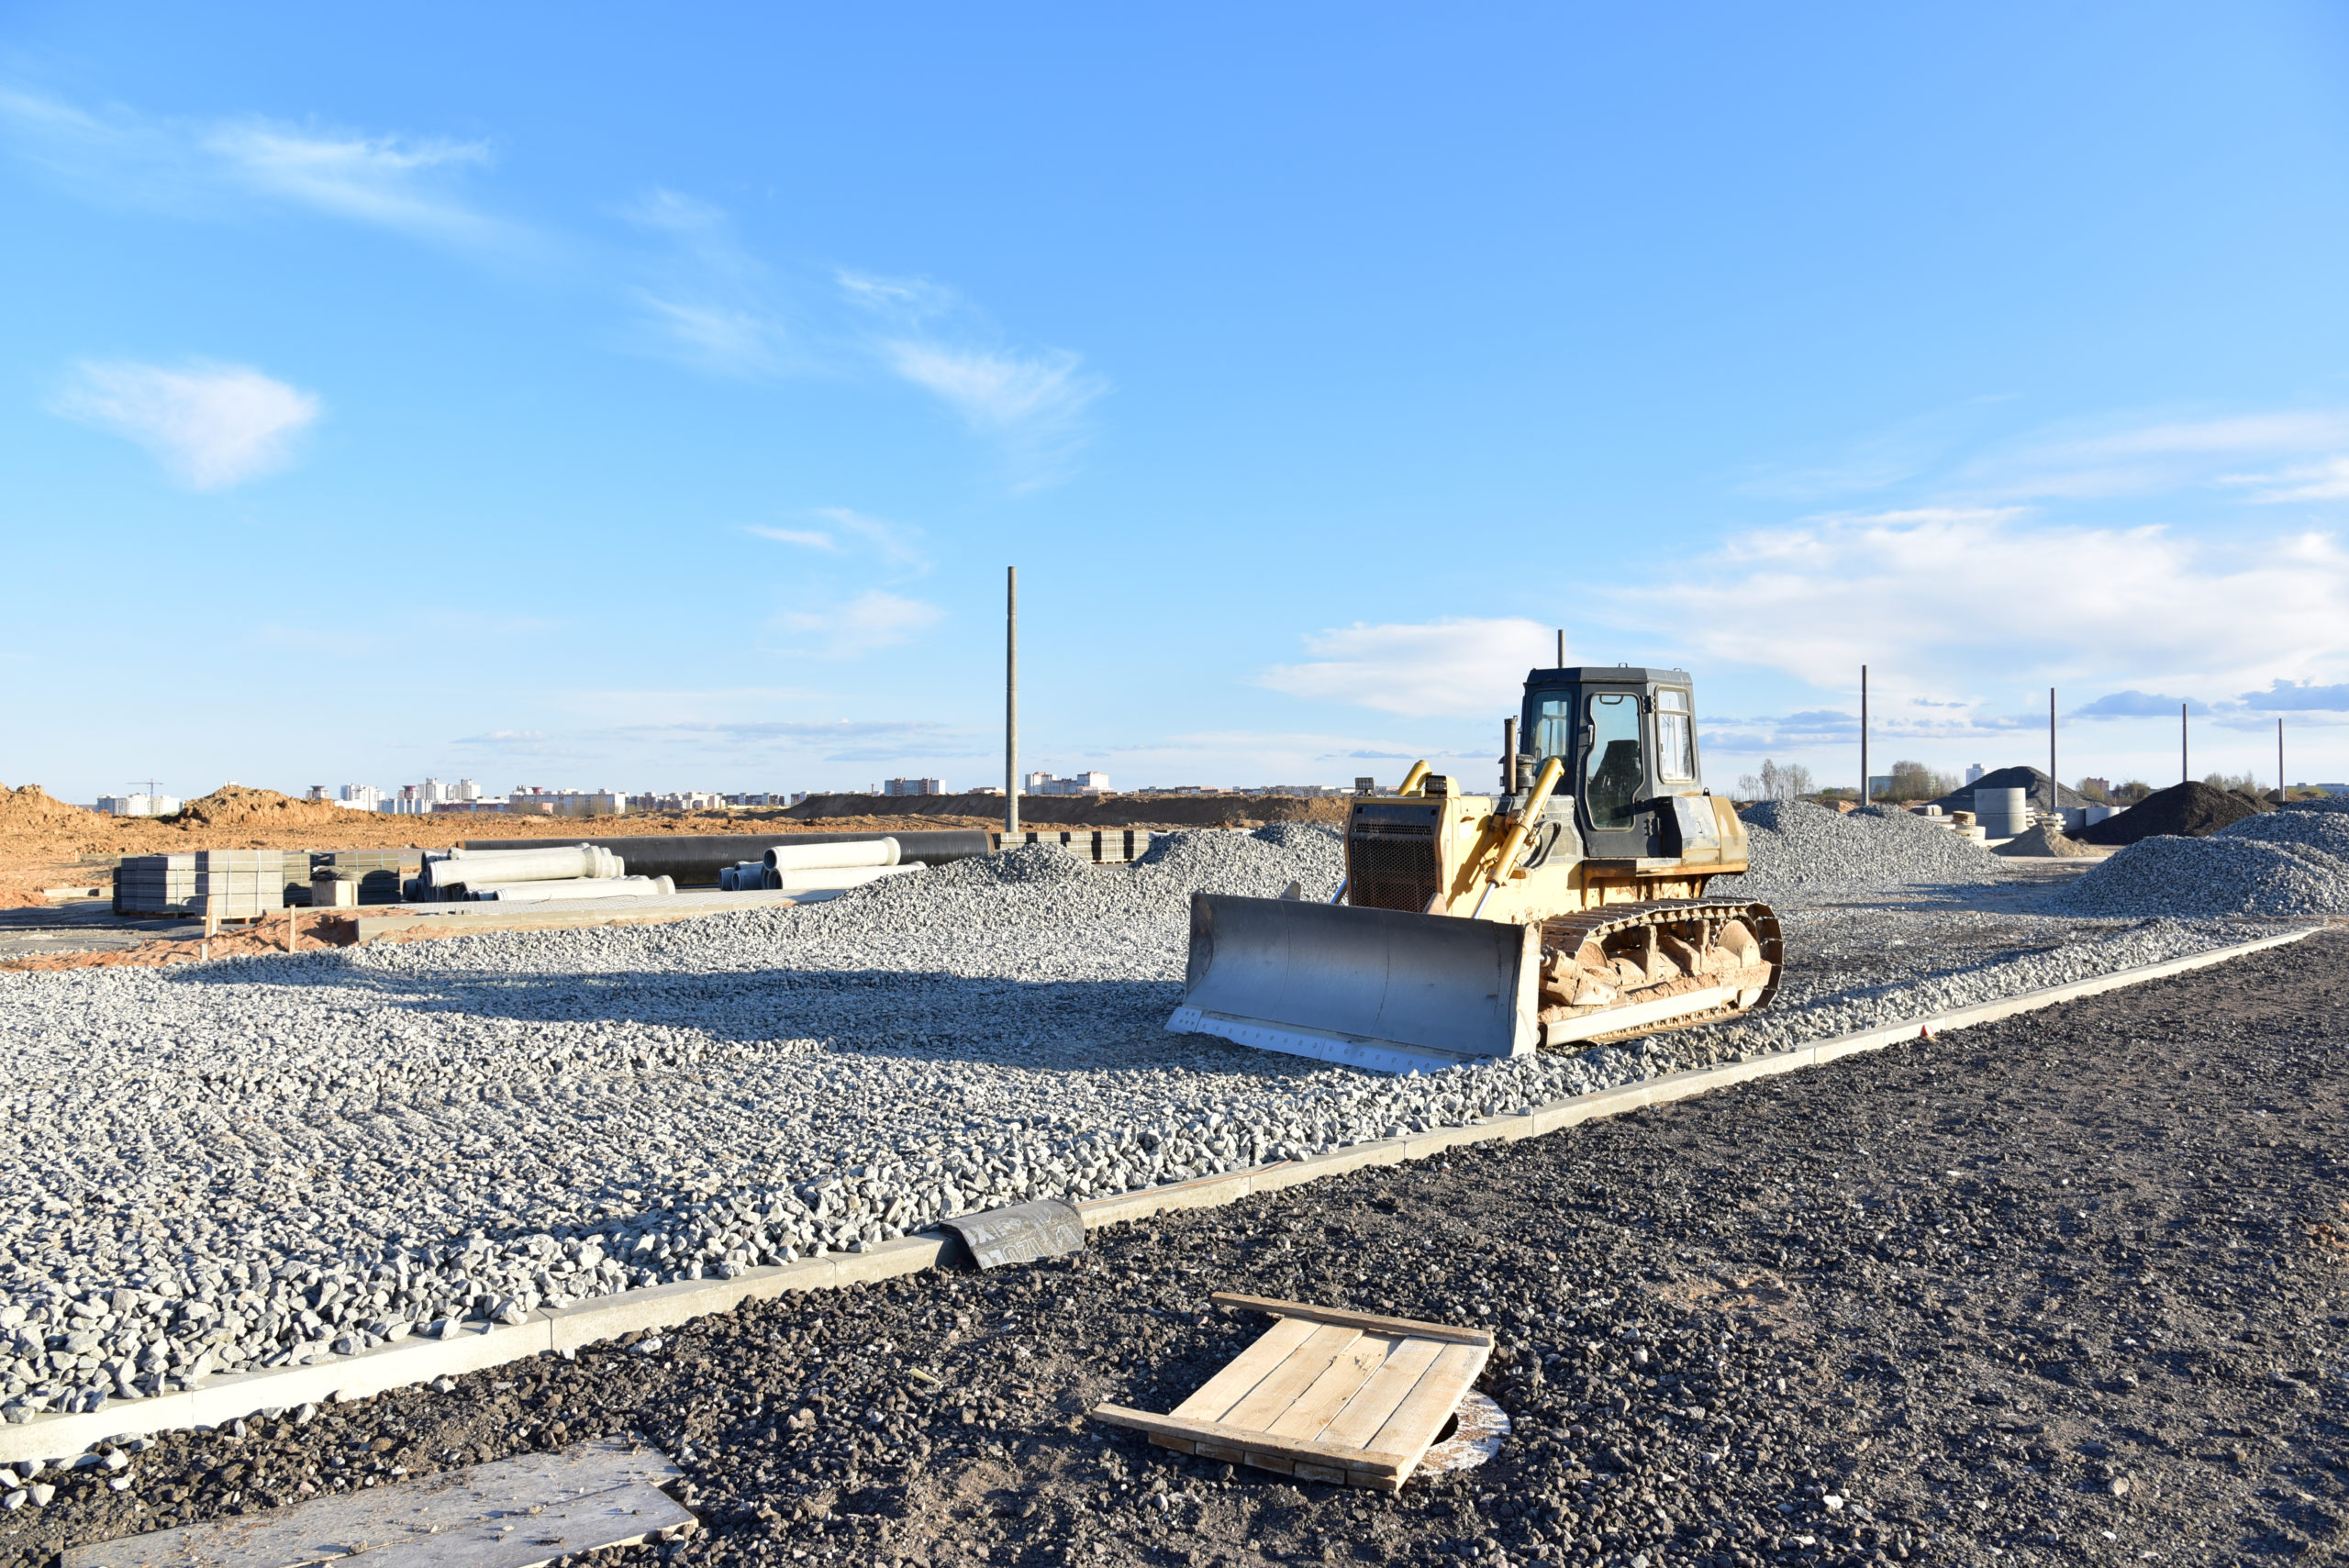 A bulldozer at a road construction site, with work in progress under a clear sky